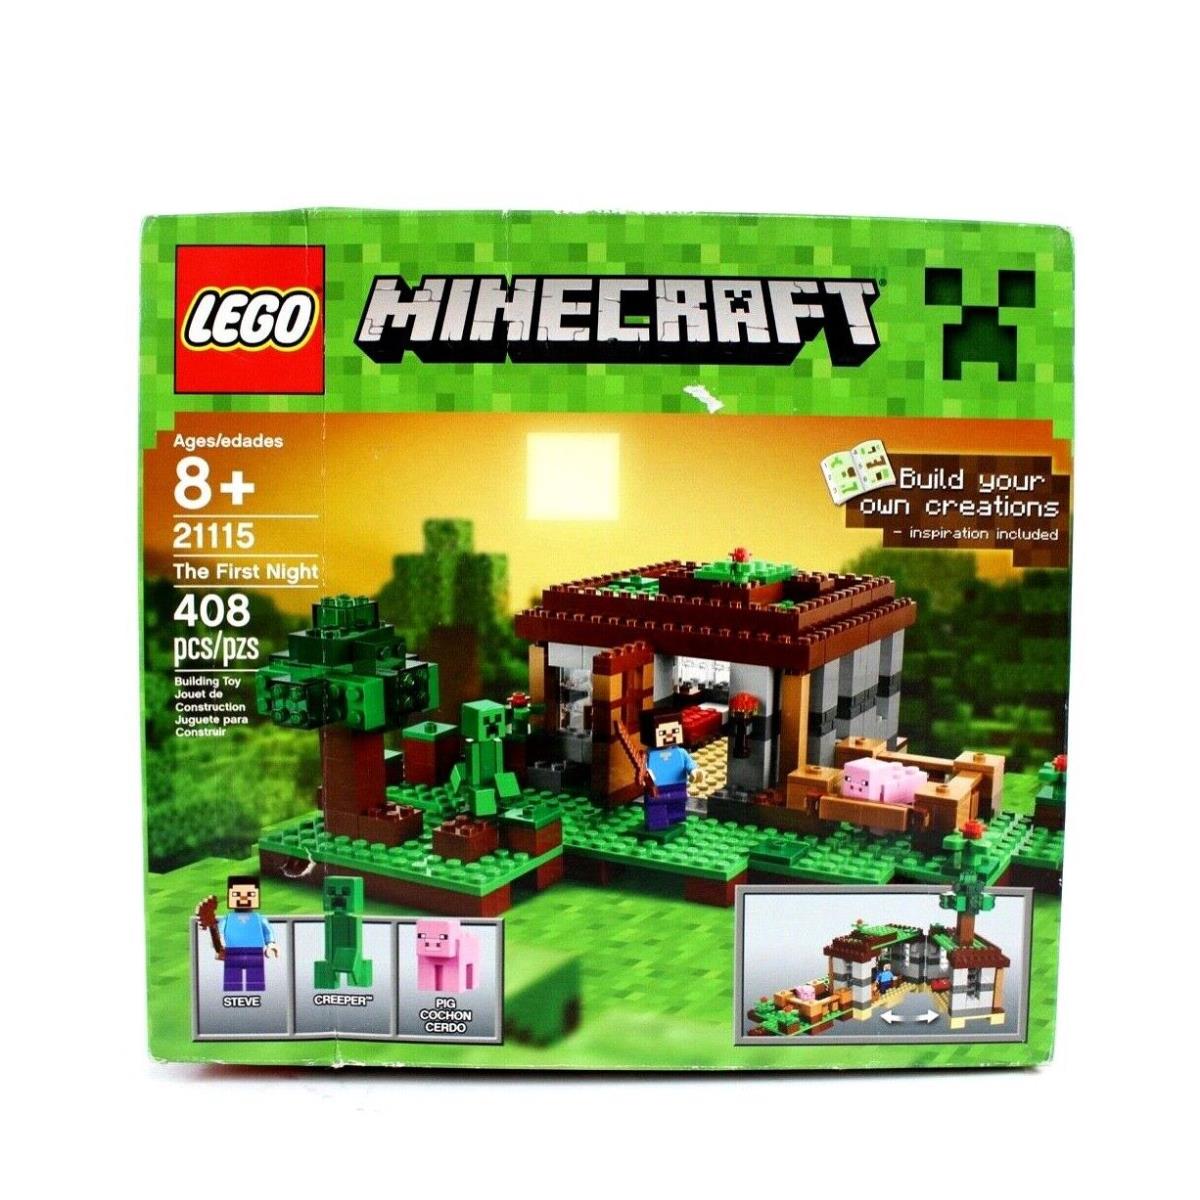 Lego Minecraft 21115 The First Night - Retired - Factory Seal